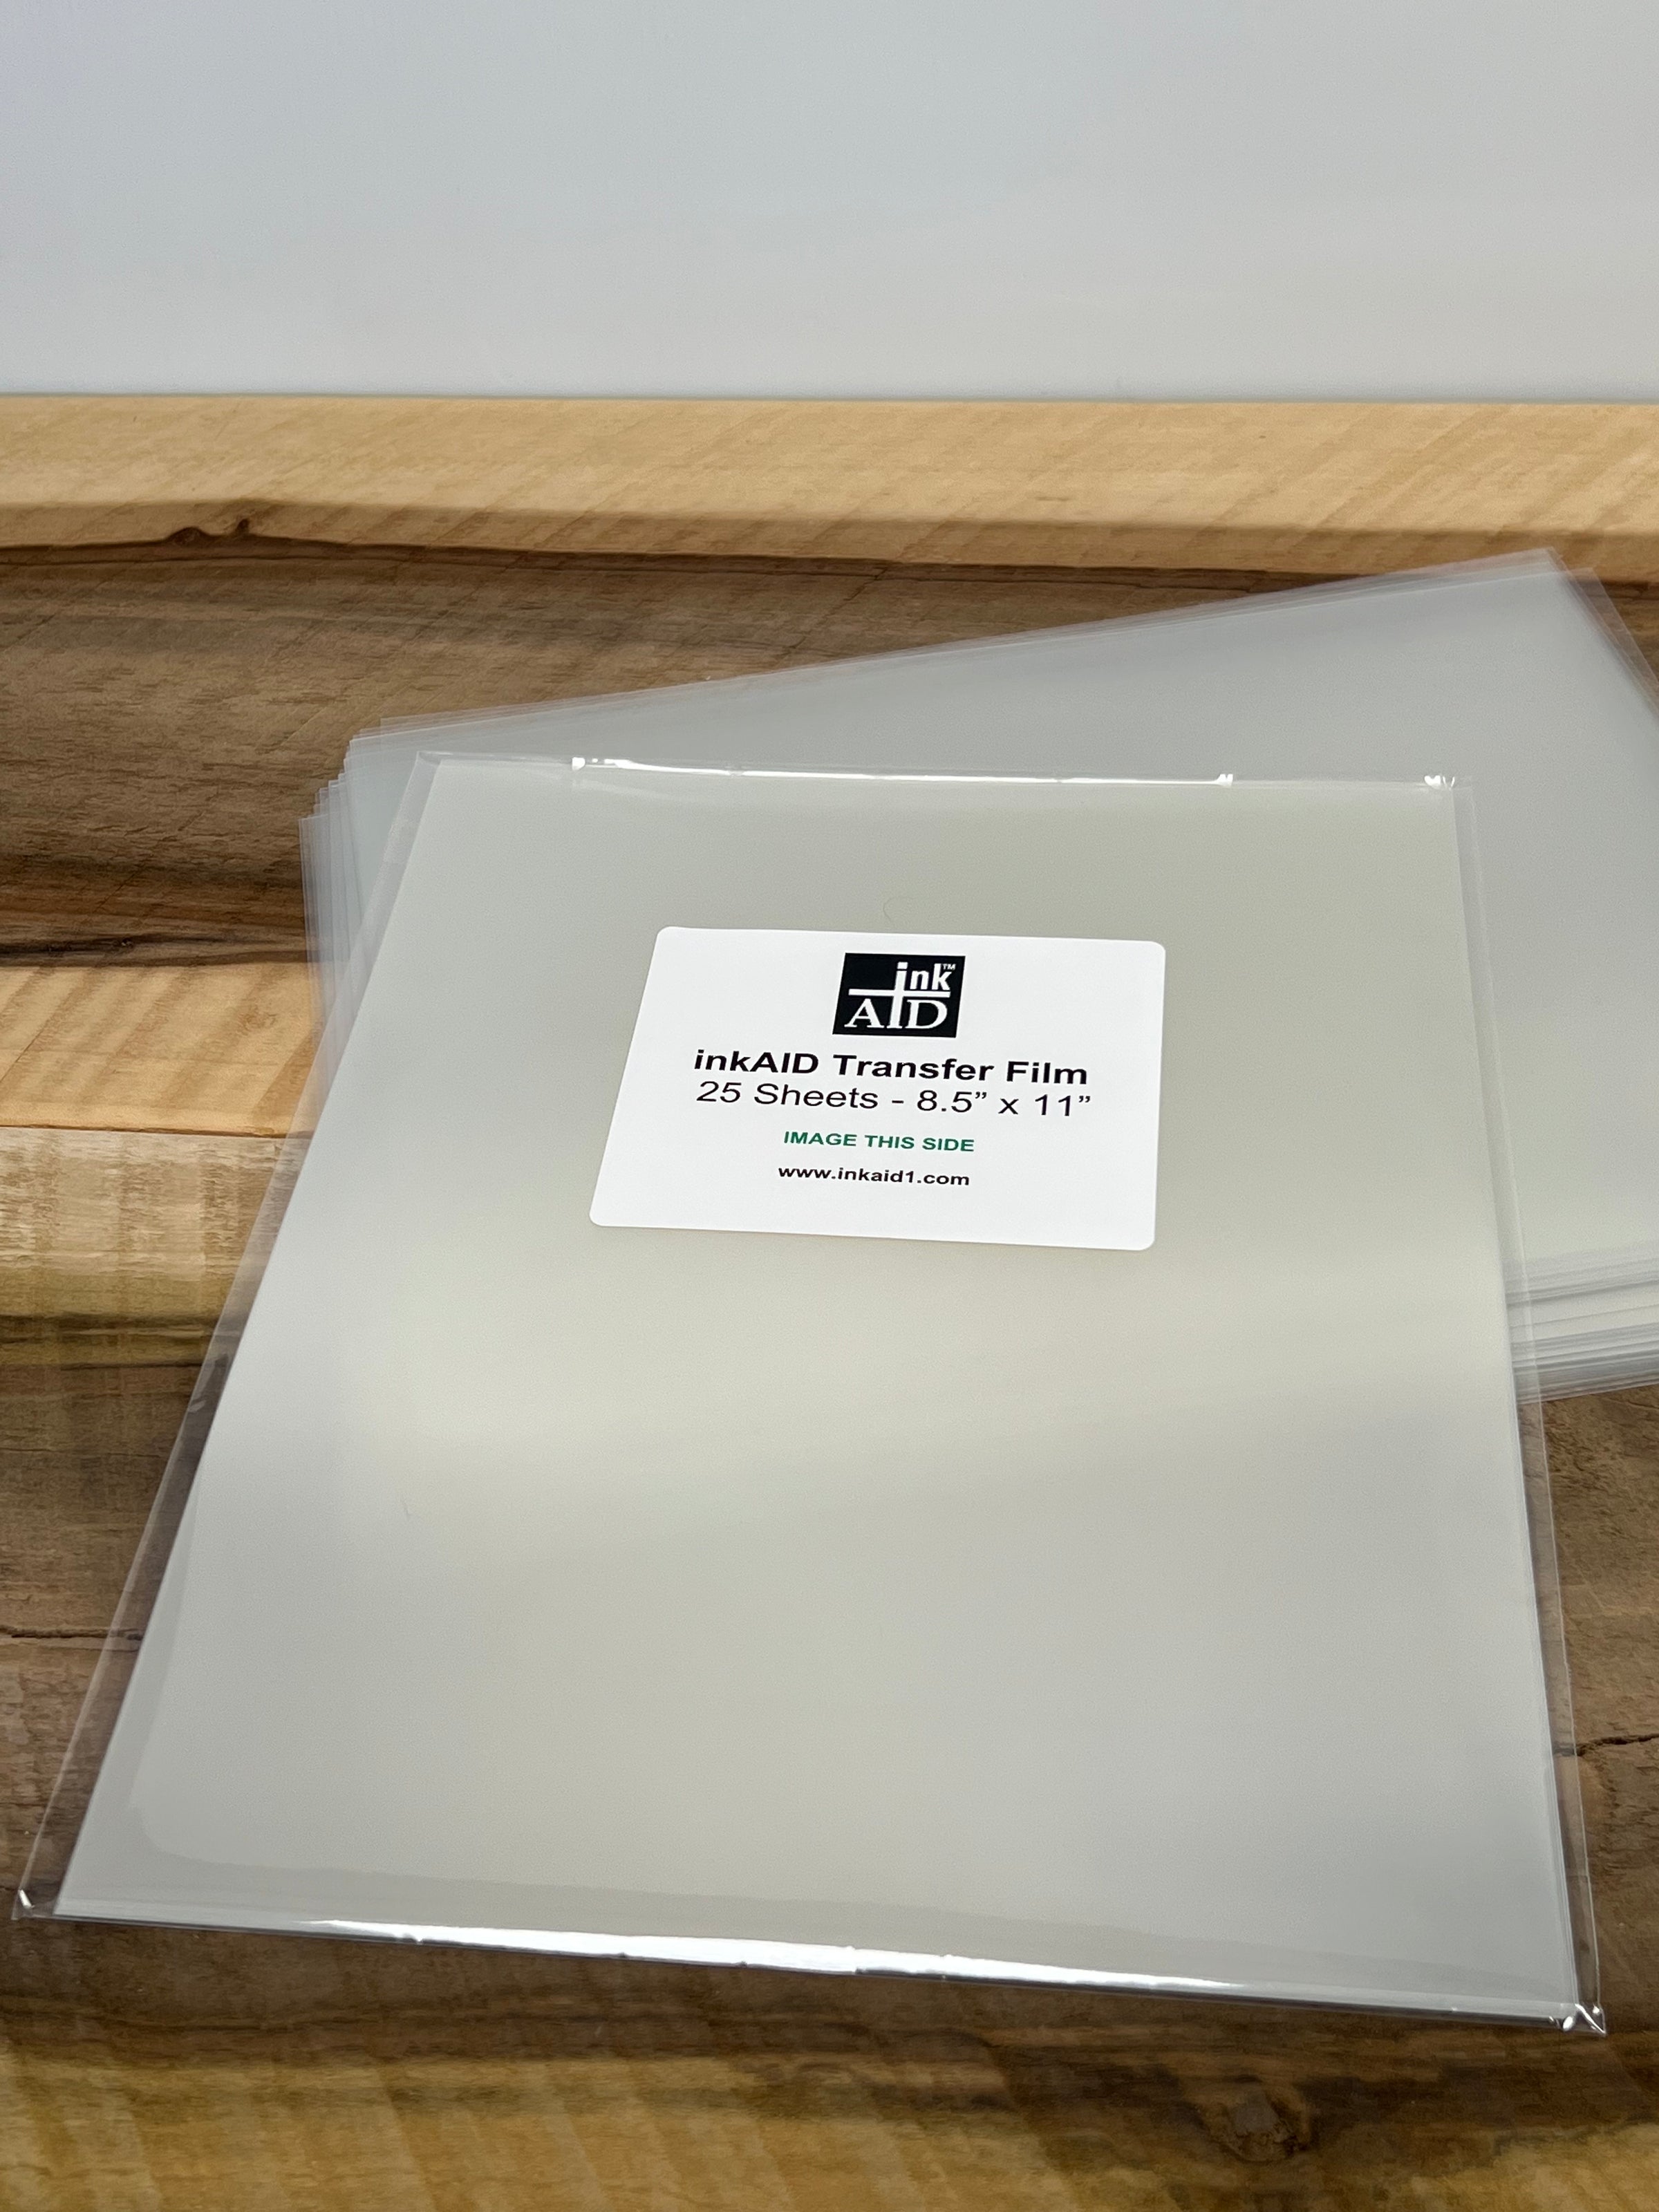 Buy Premium Laminated Clear Bags, for 8.5x11 thin, Art or Photos